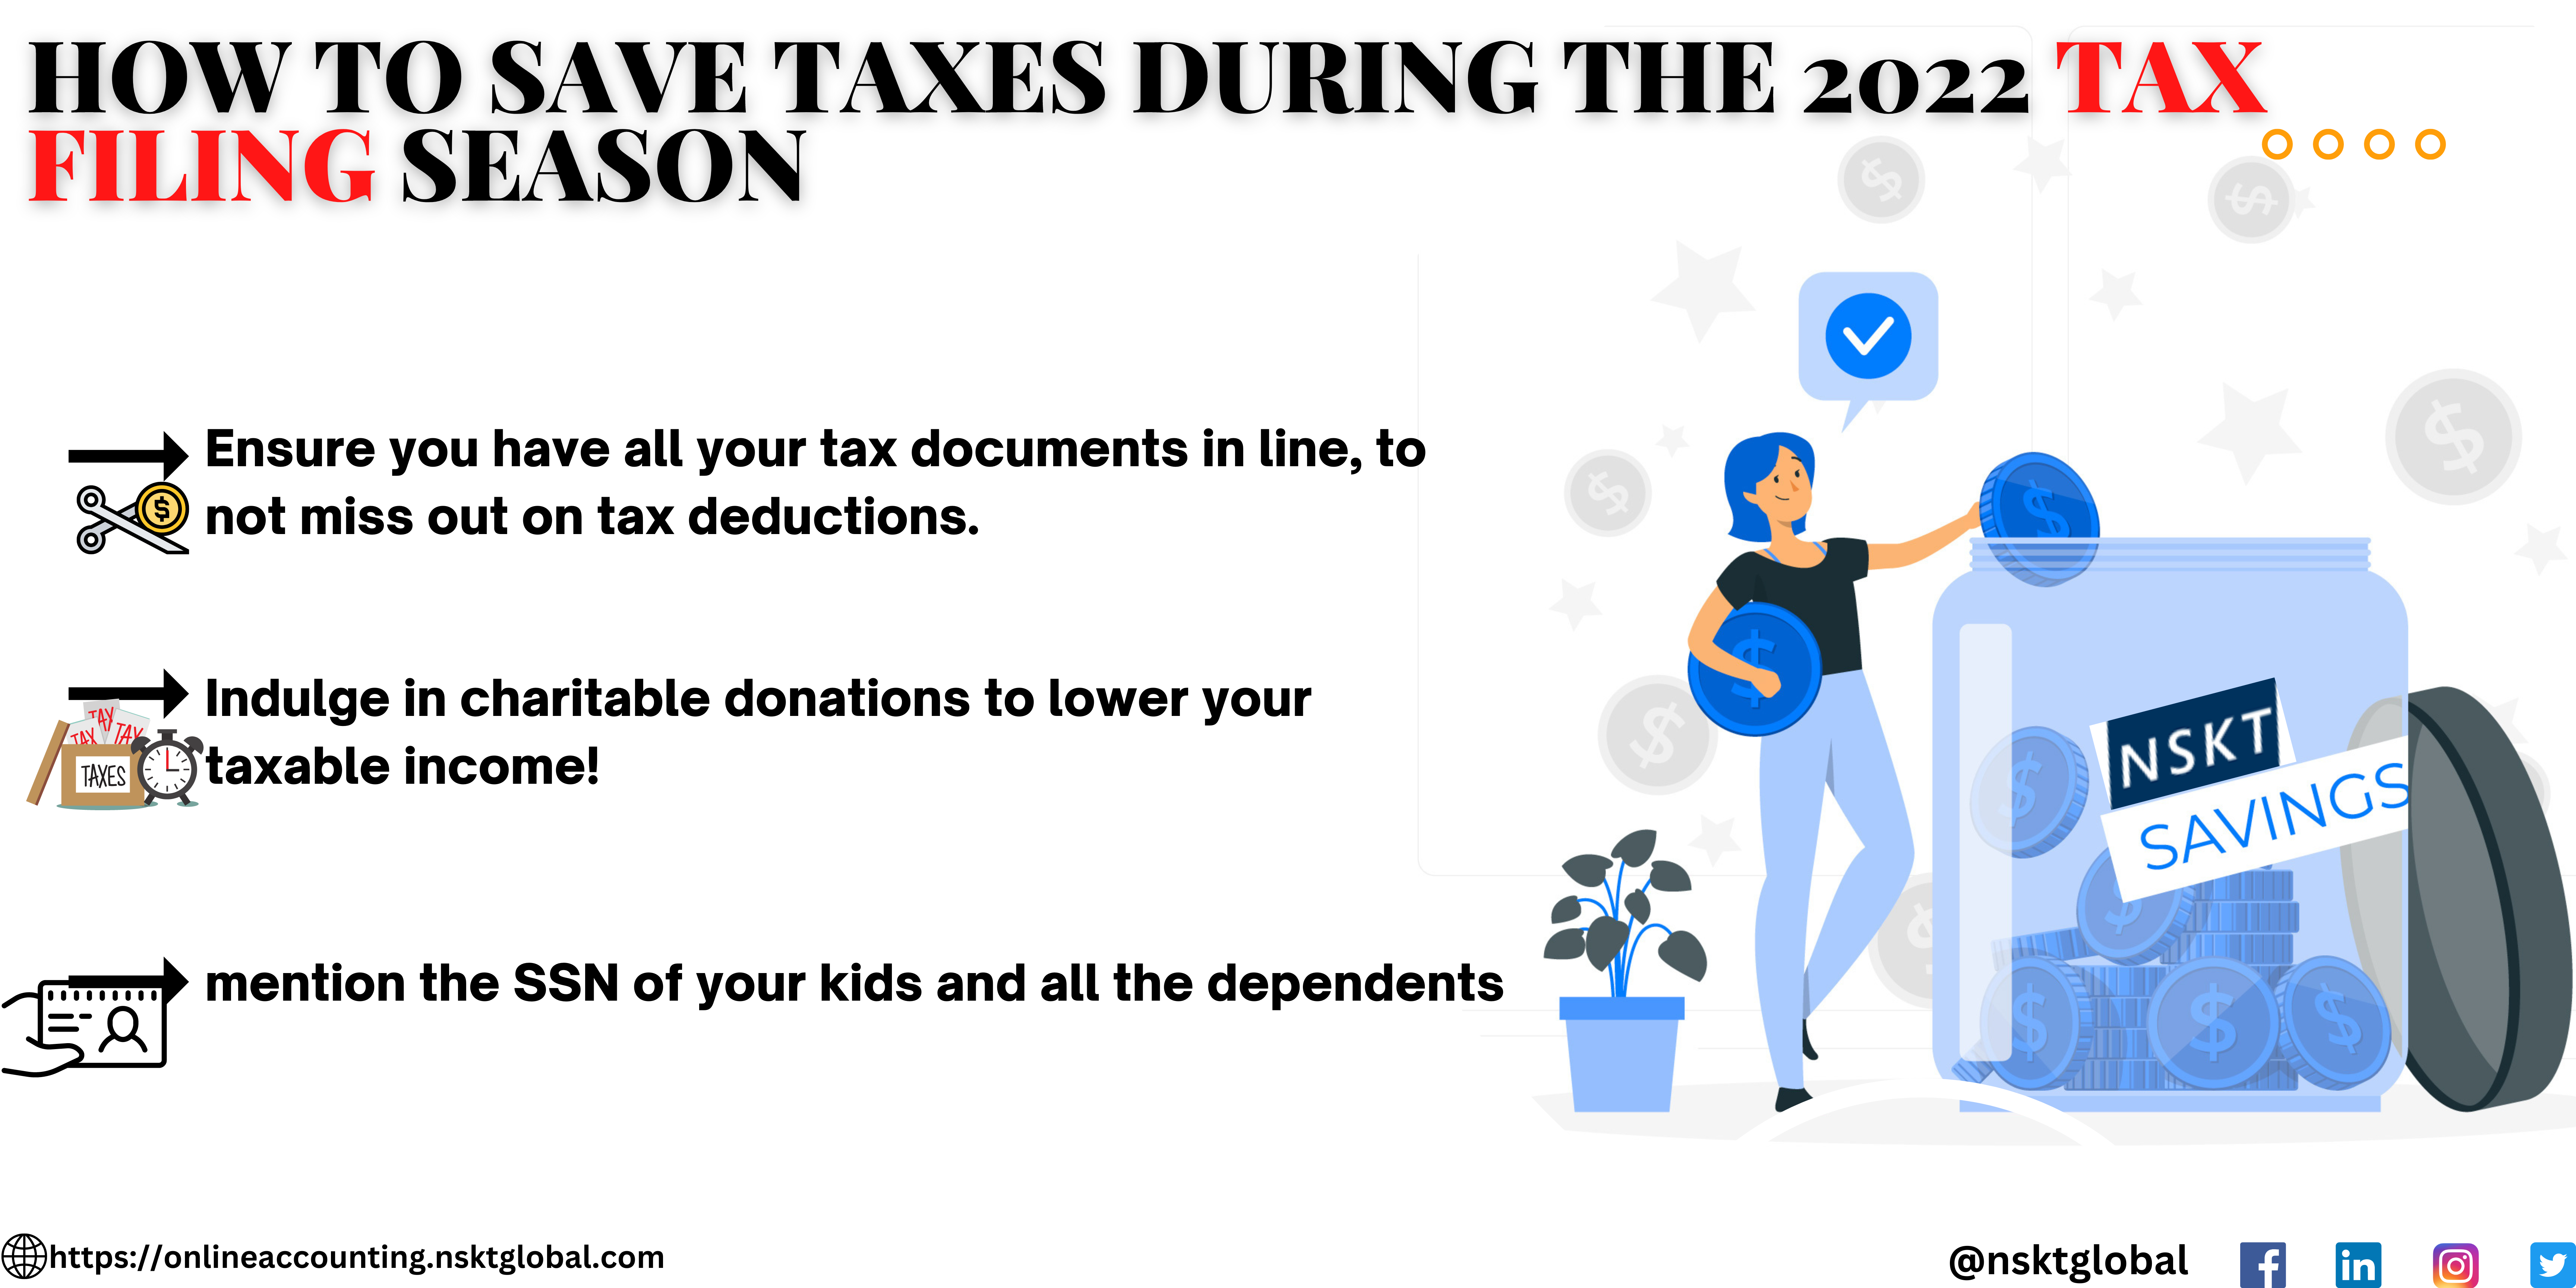 How to save taxes during the 2022 tax filing season